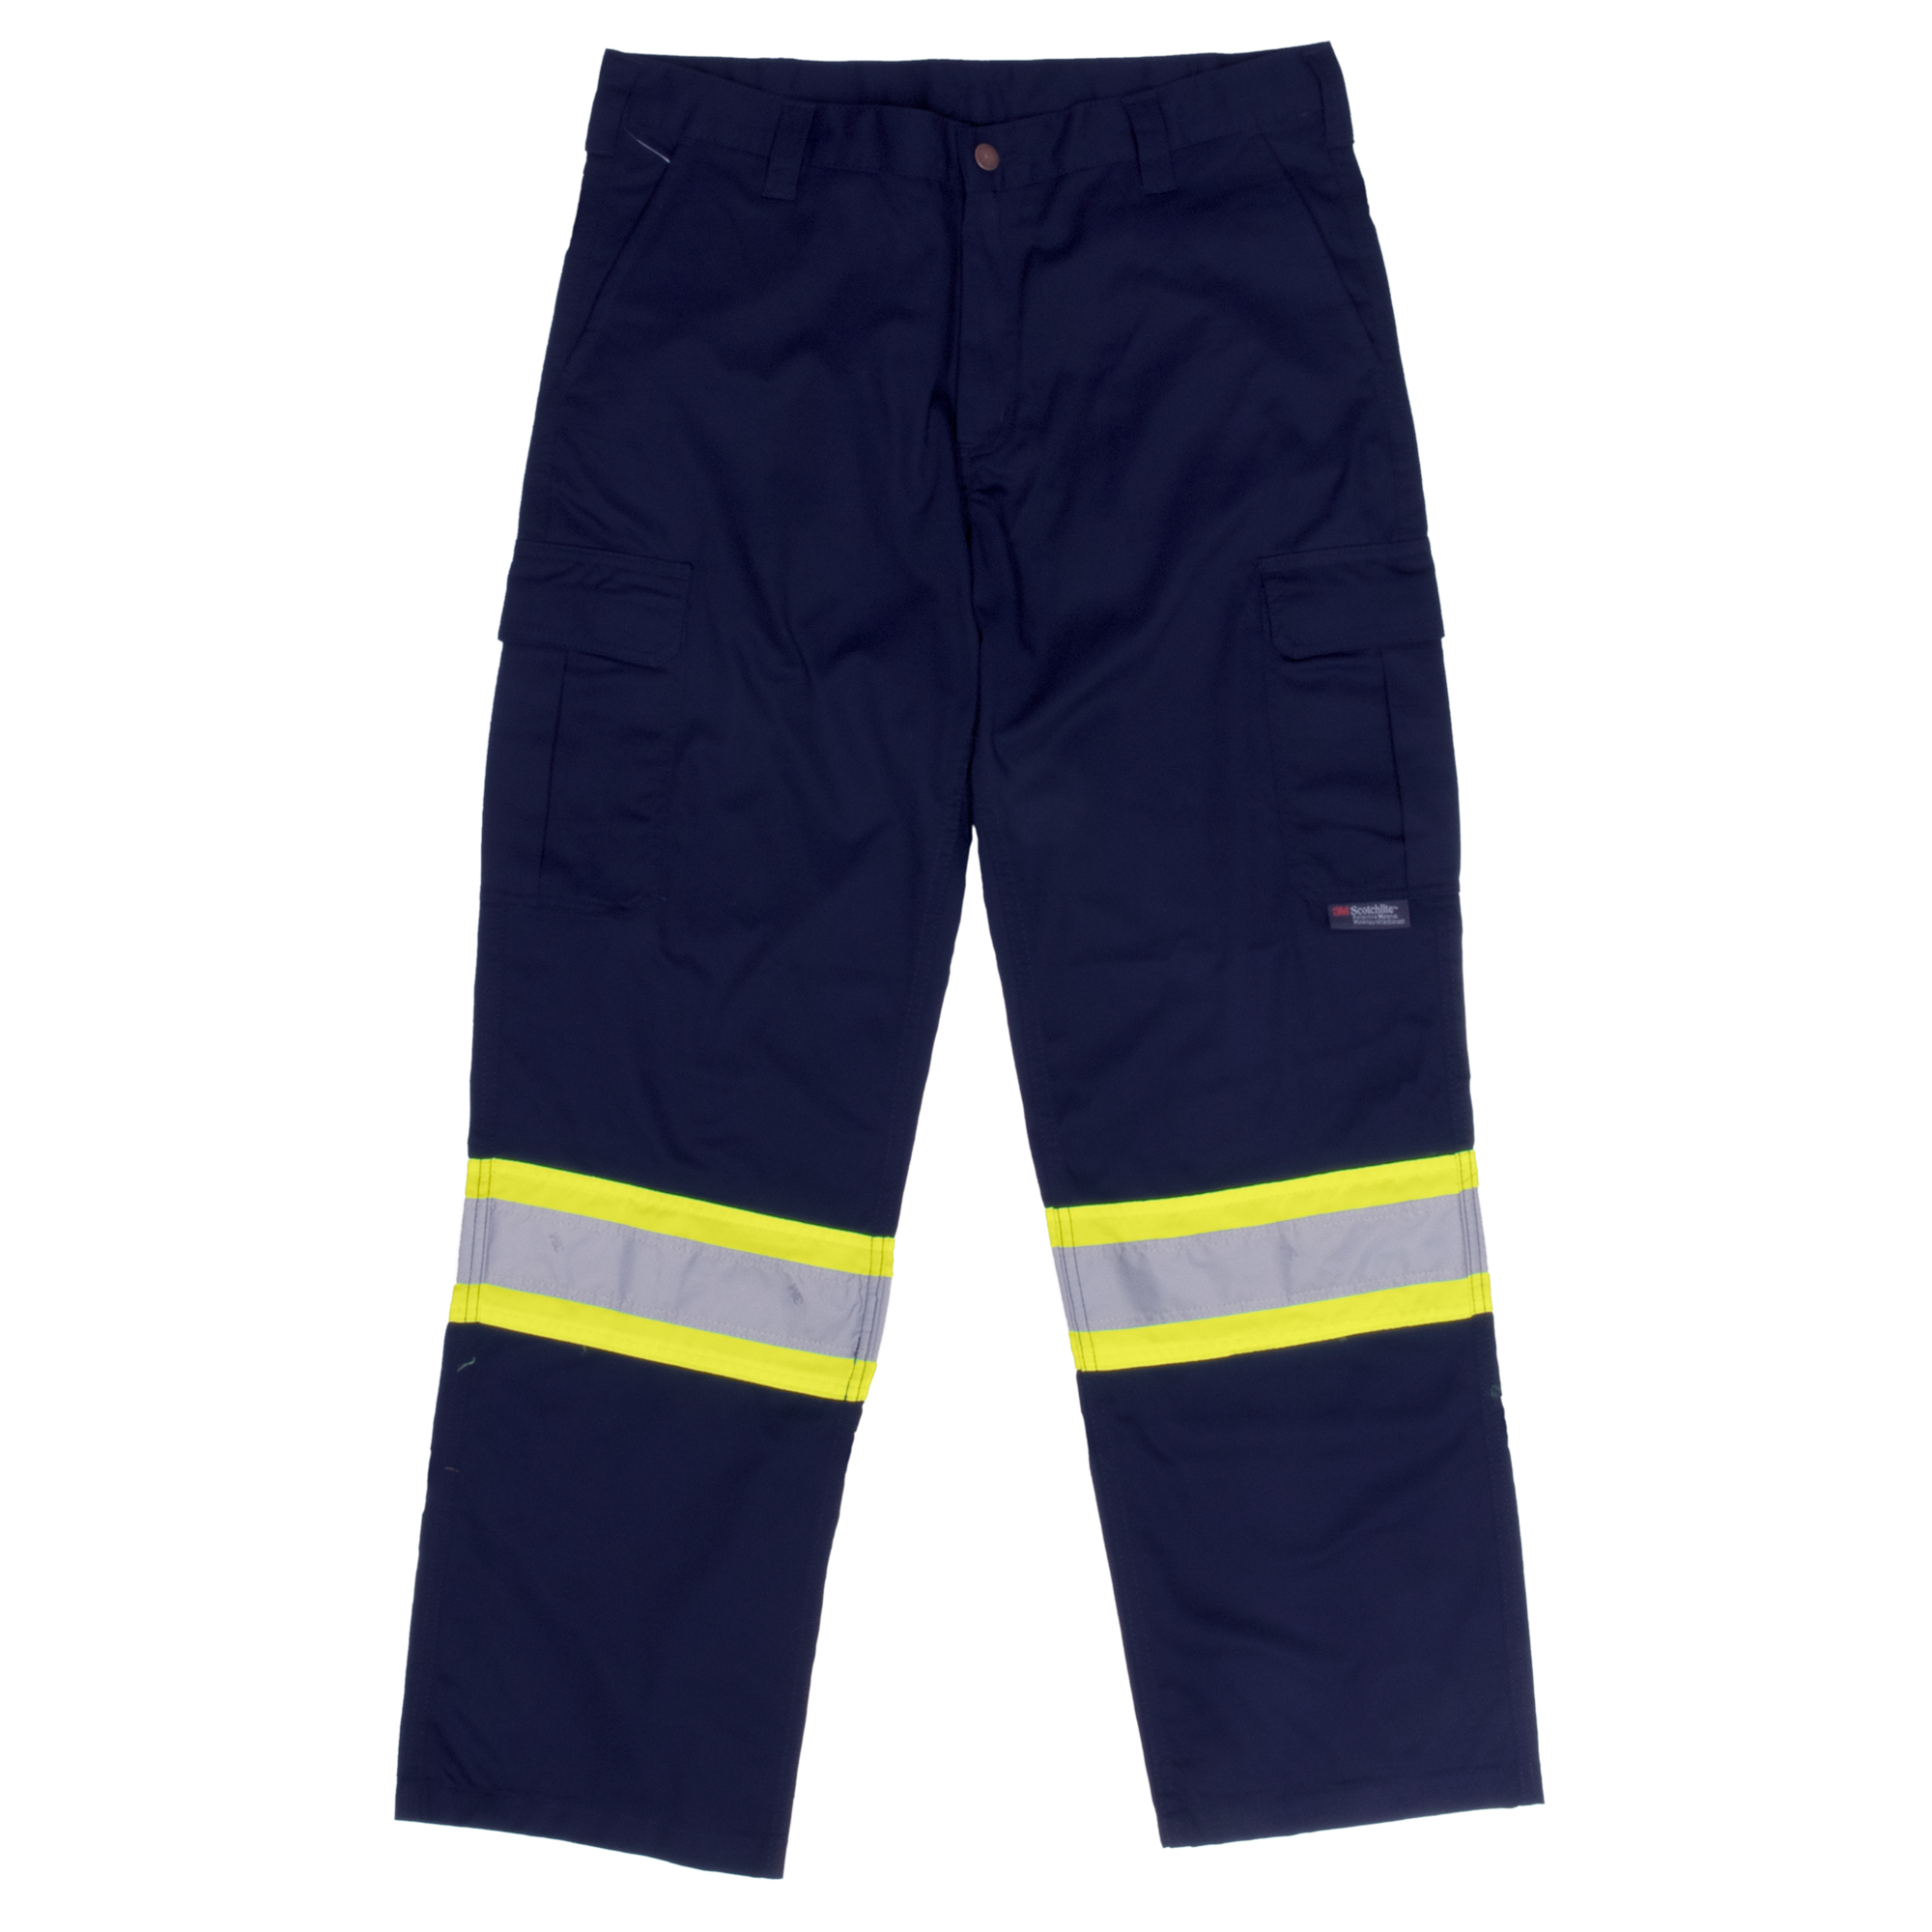 Tough Duck, Safety Cargo Utility Pant, Waist 38 in, Inseam 30 in, Color Navy, Model S60701